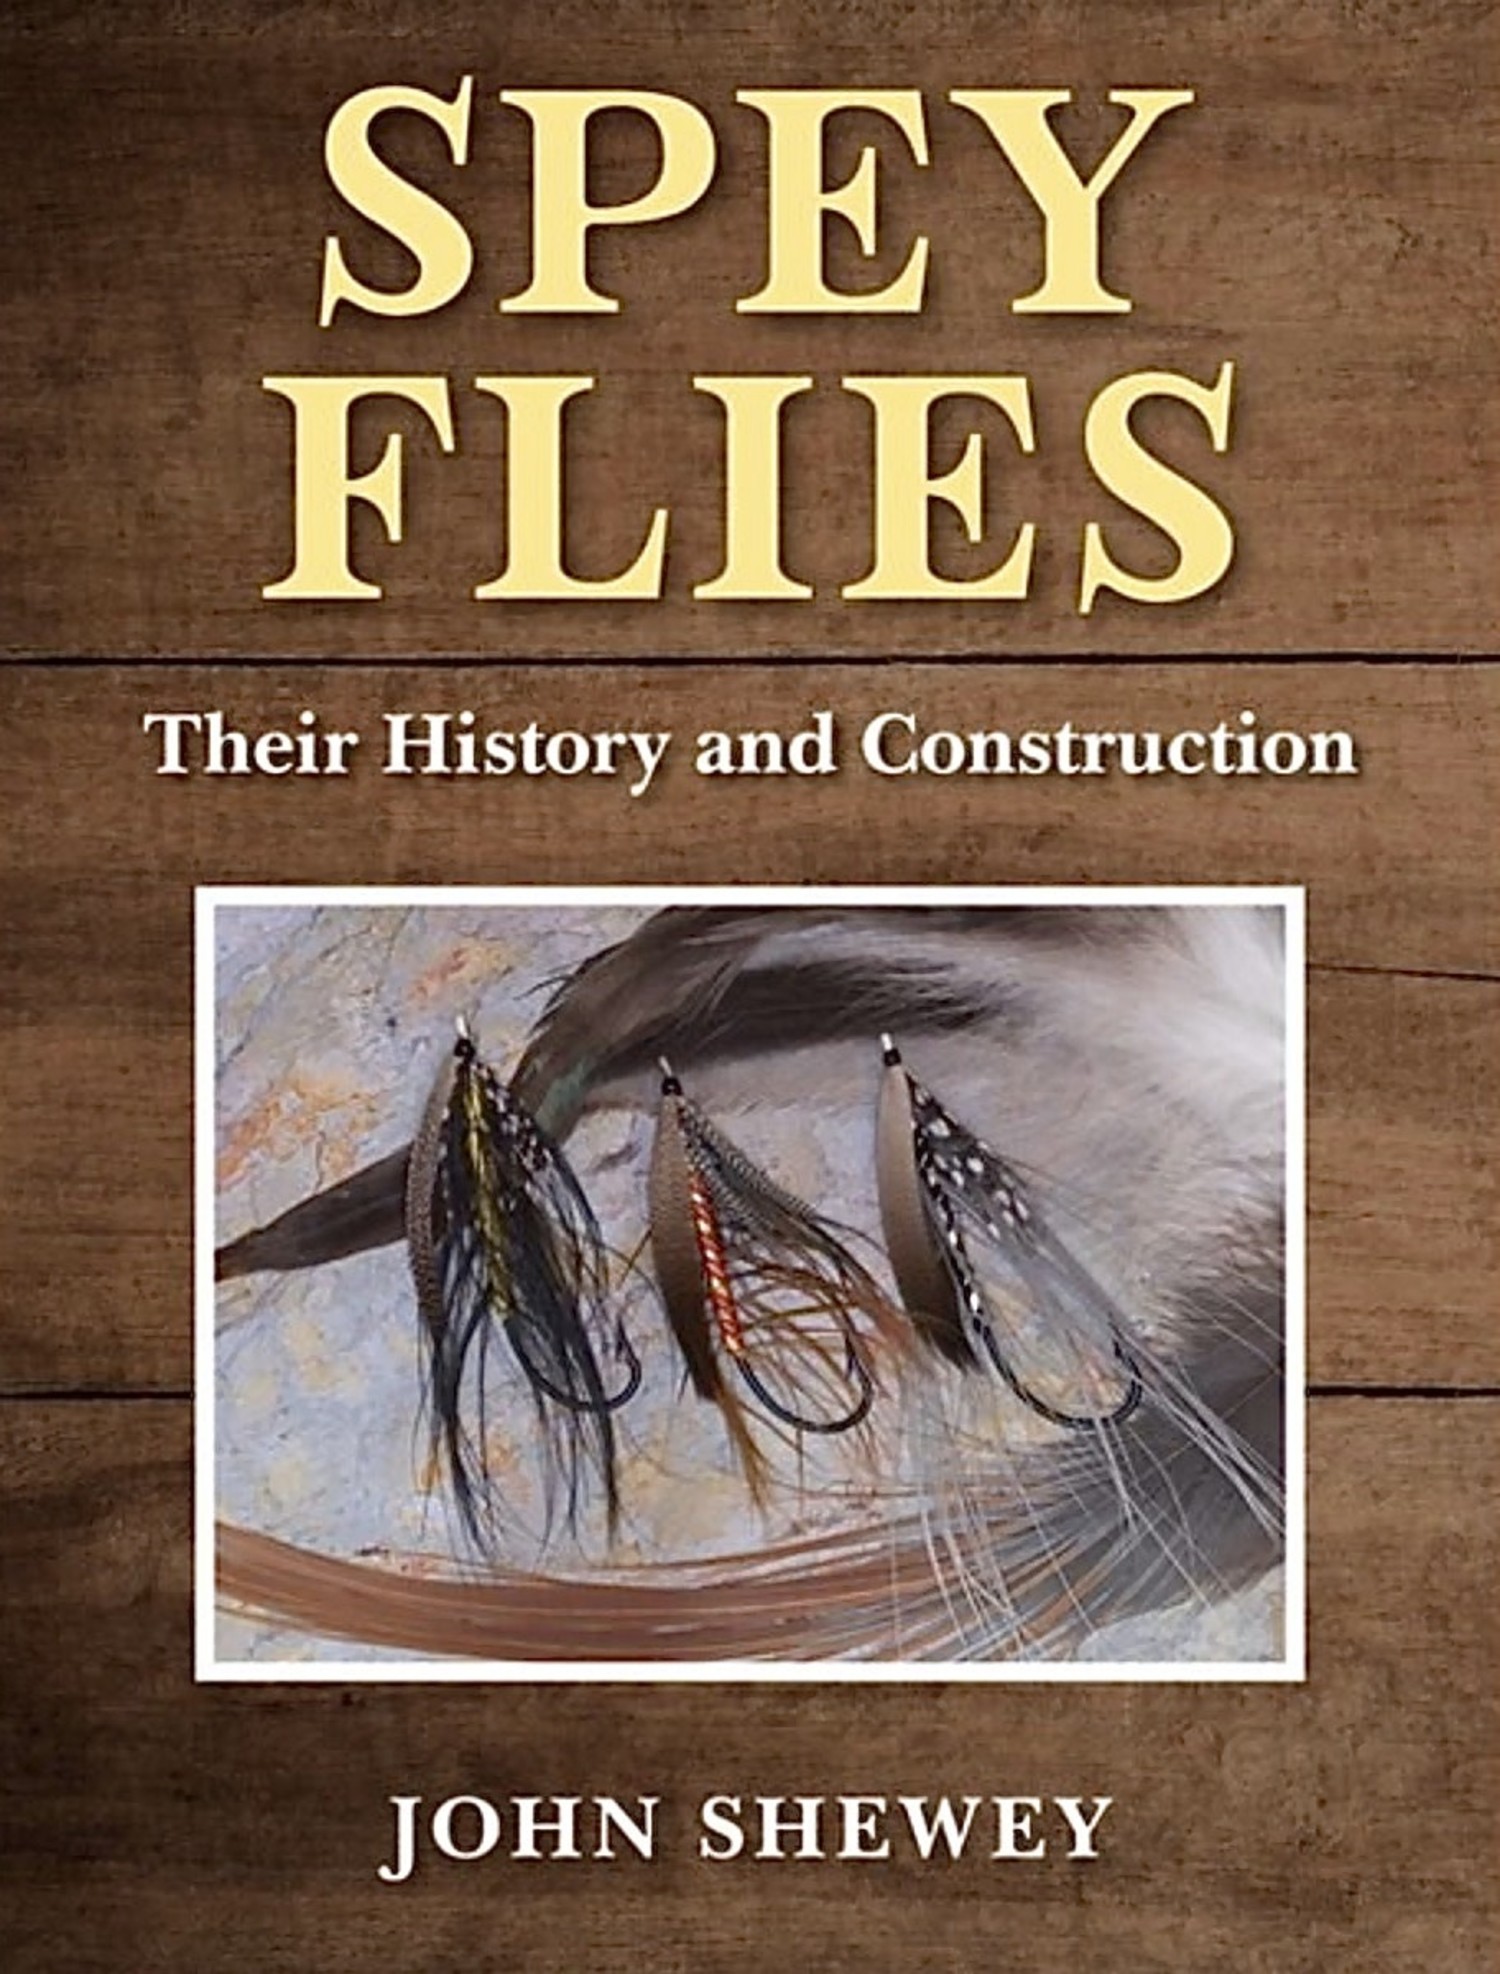 Spey Flies, Their History and Construction by John Shewey - Royal